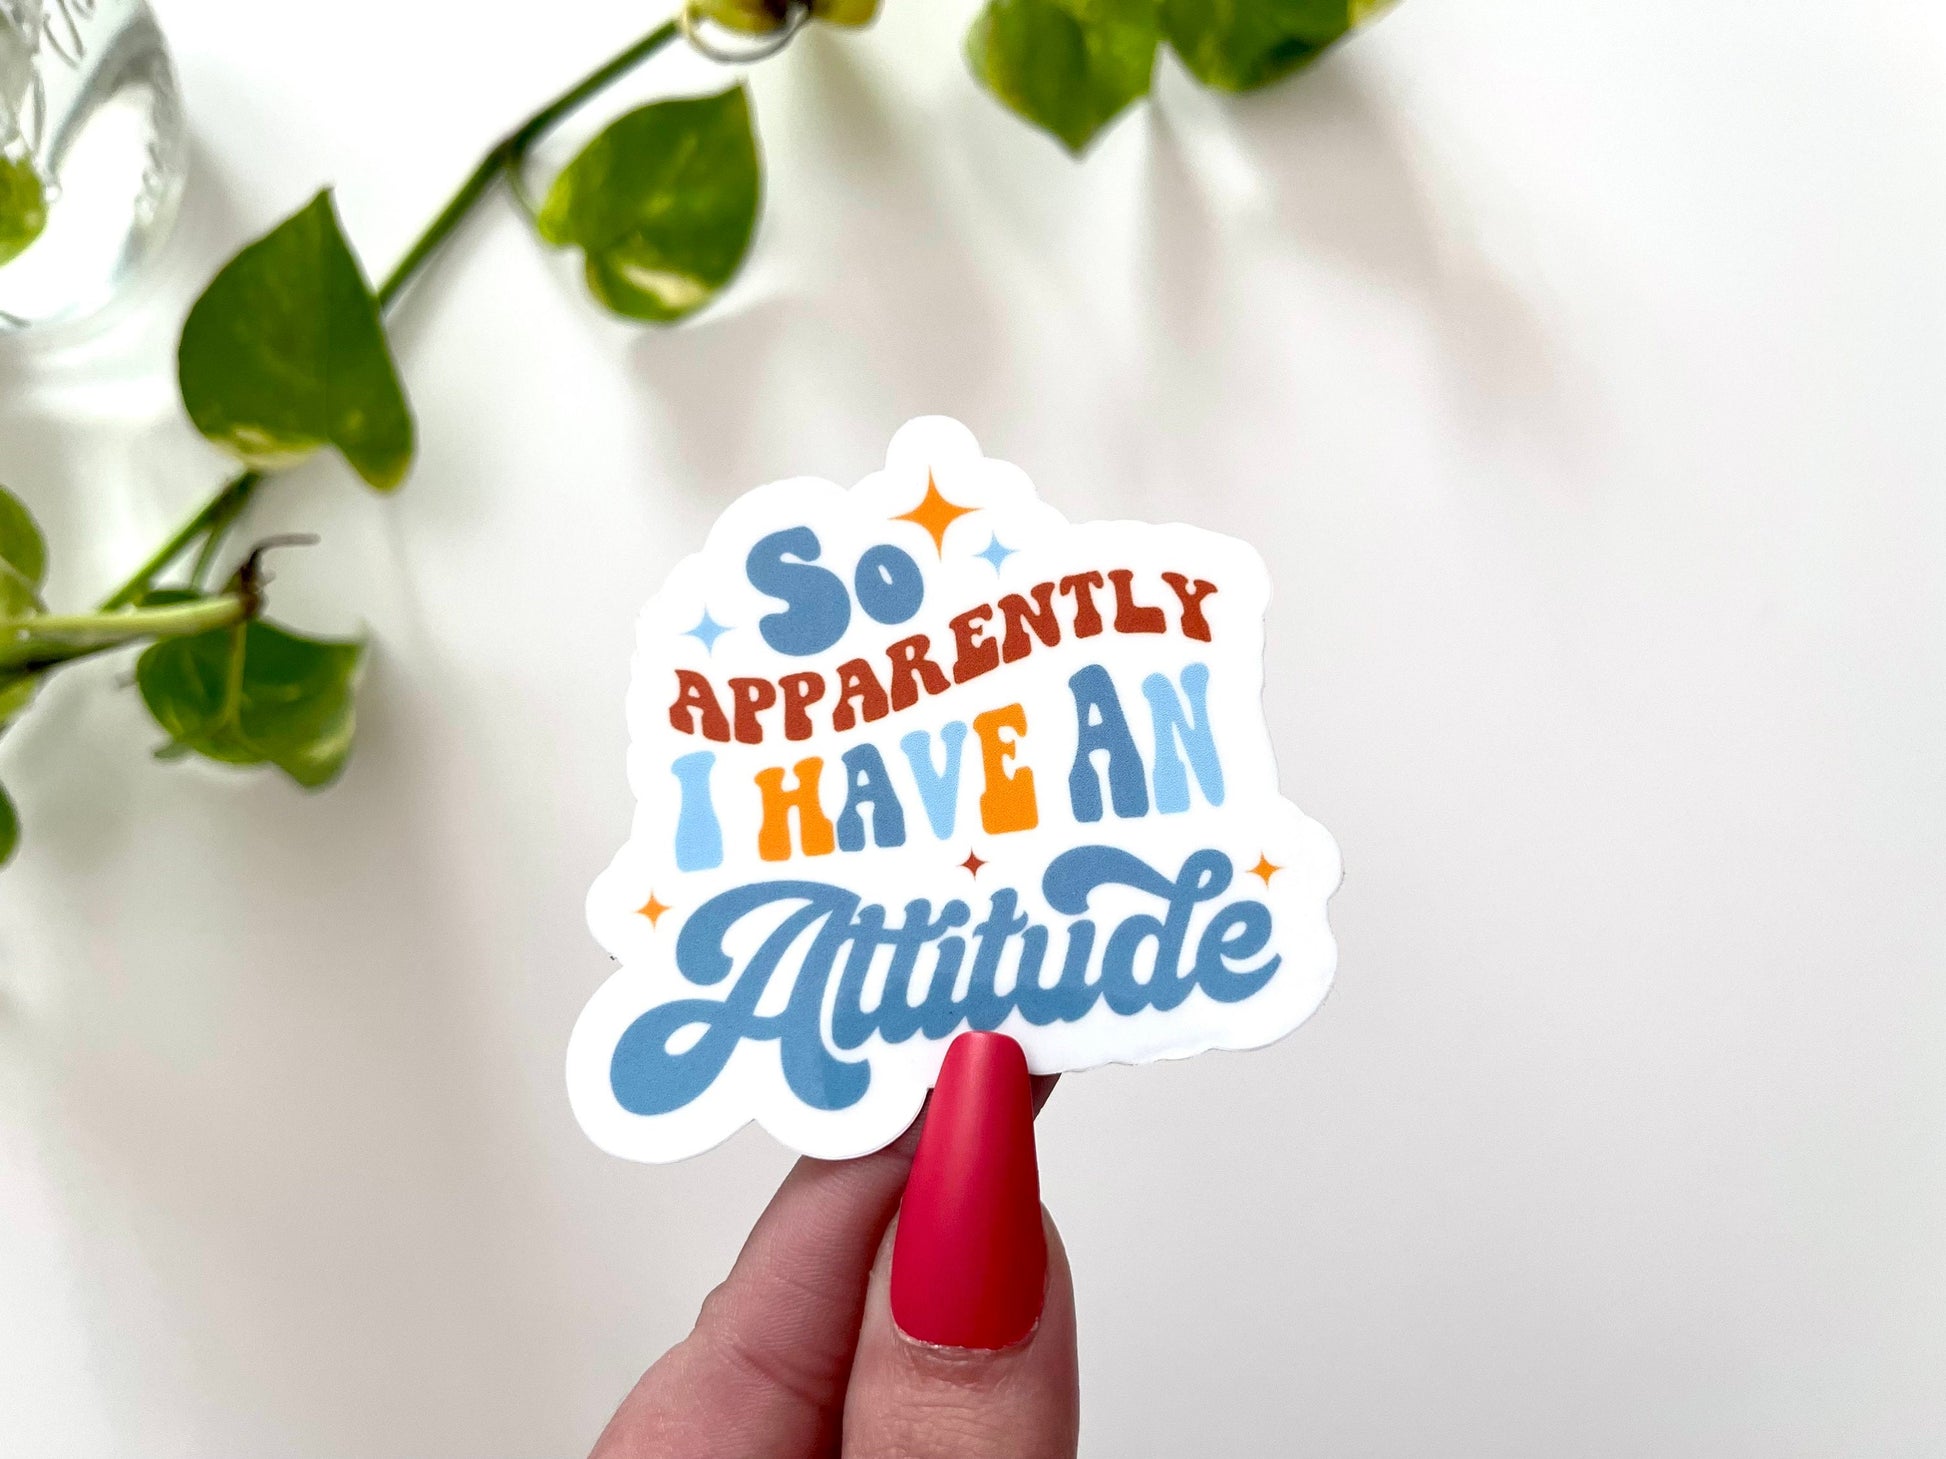 Apparently I Have An Attitude Sticker, Gifts for Her, Funny Stickers, Trendy Stickers, Attitude Sticker, Funny Gifts, Waterbottle Sticker